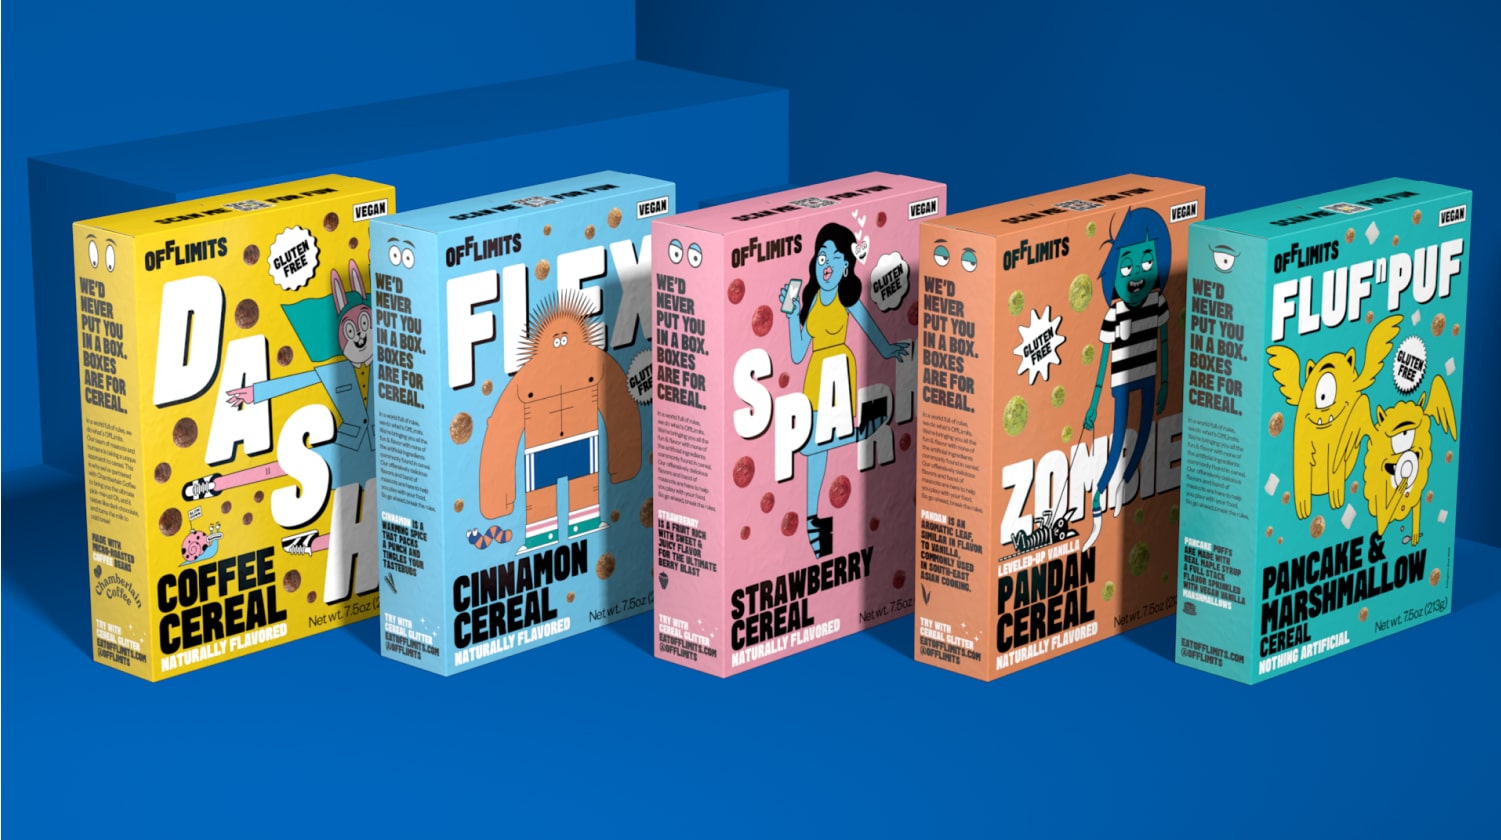 An array of OffLimits cereal boxes on a blue background